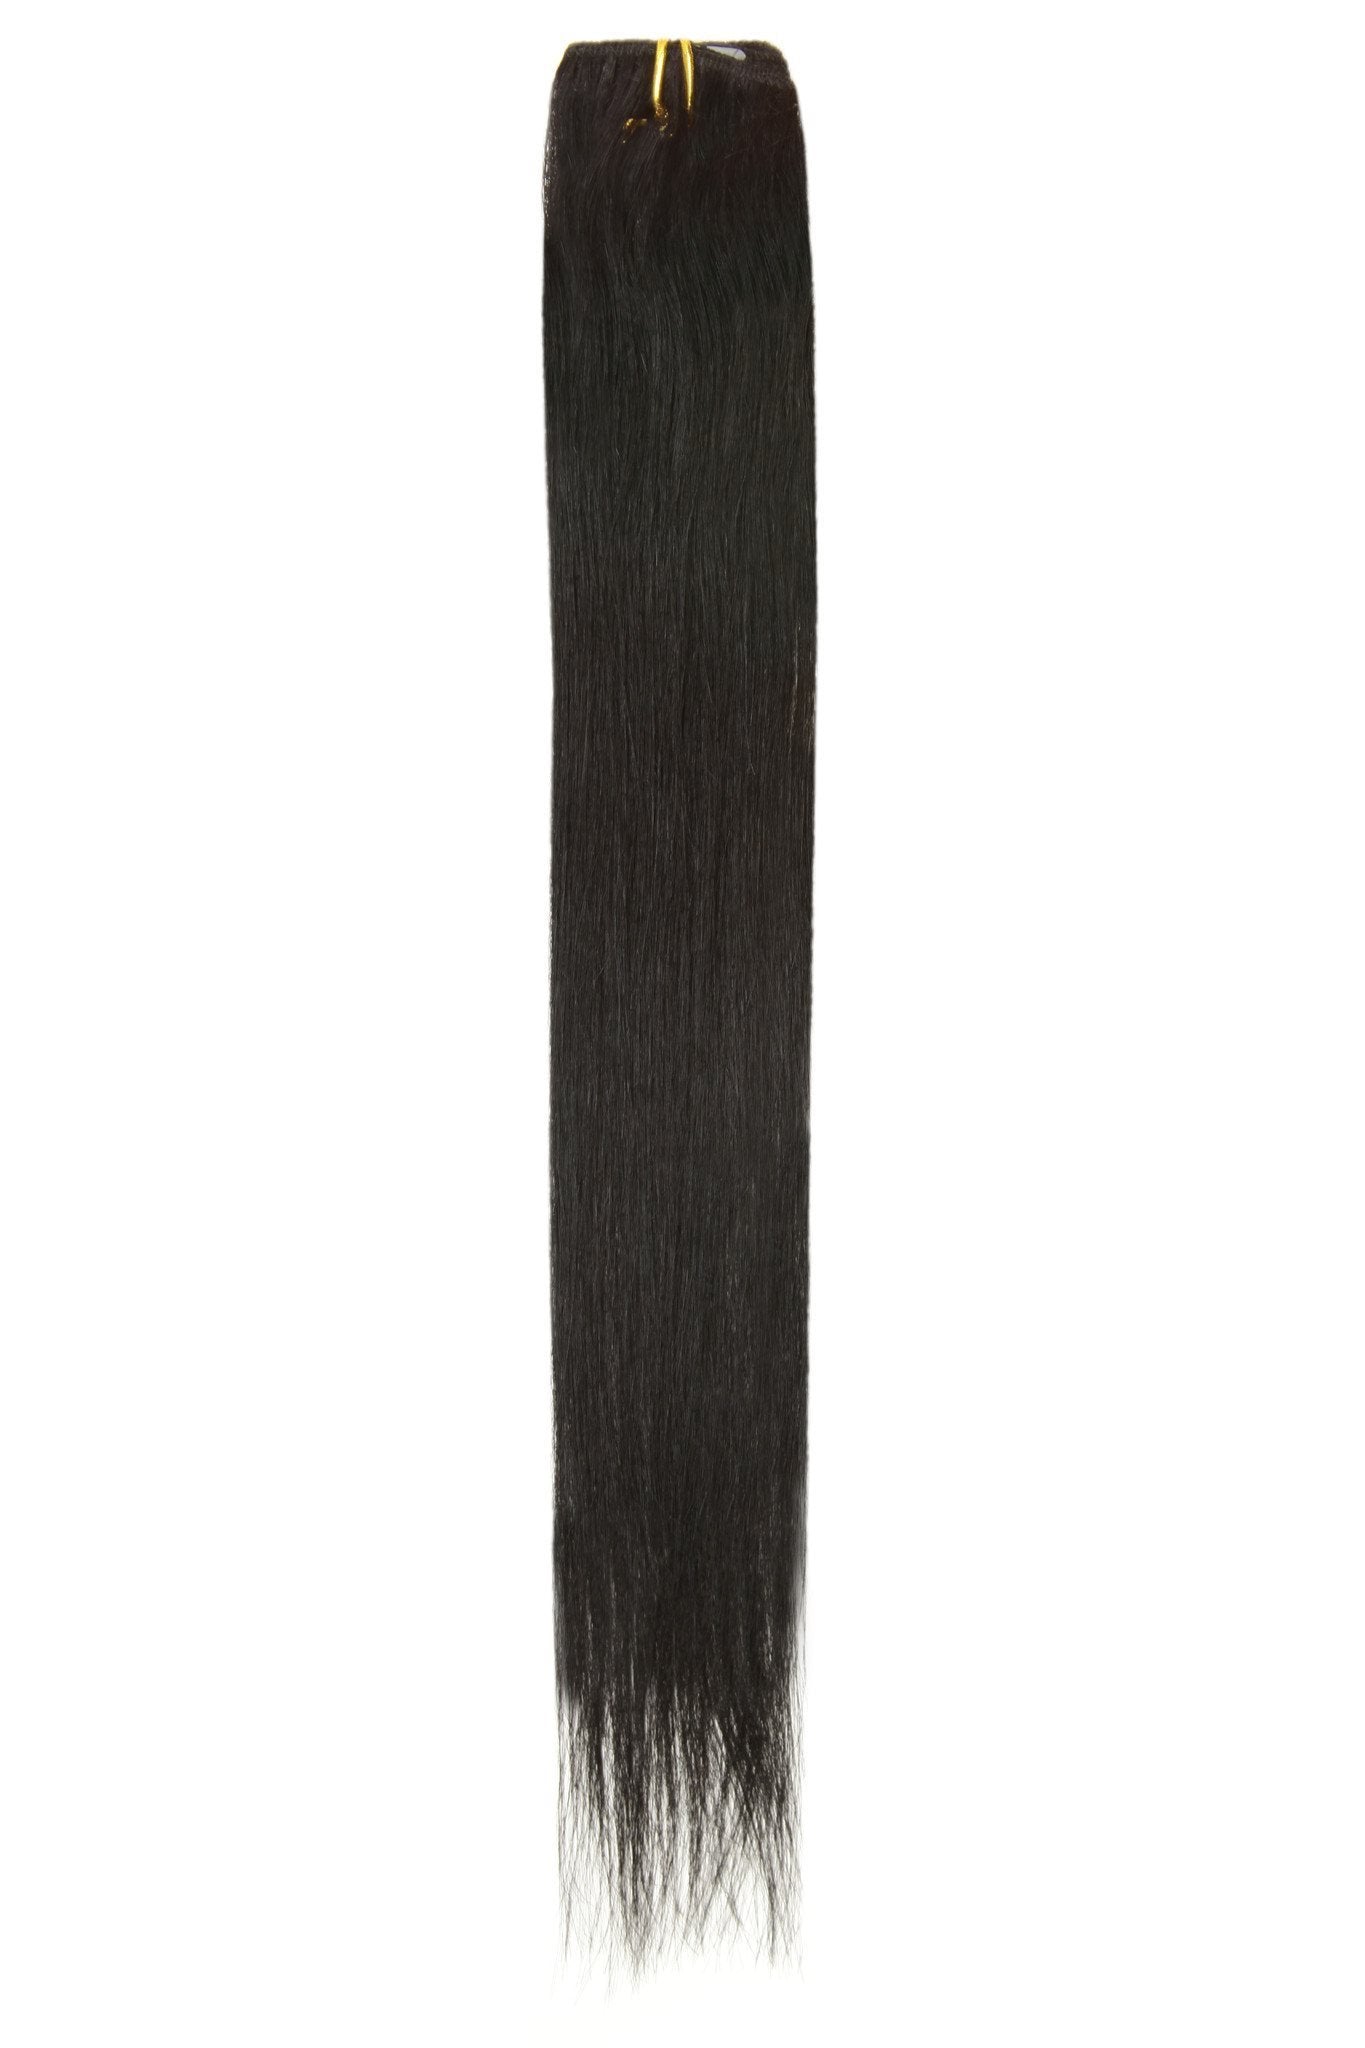 Single Weft Clip in Hair 18" Jet Black (1) - Beauty Hair Products LtdHair Extensions